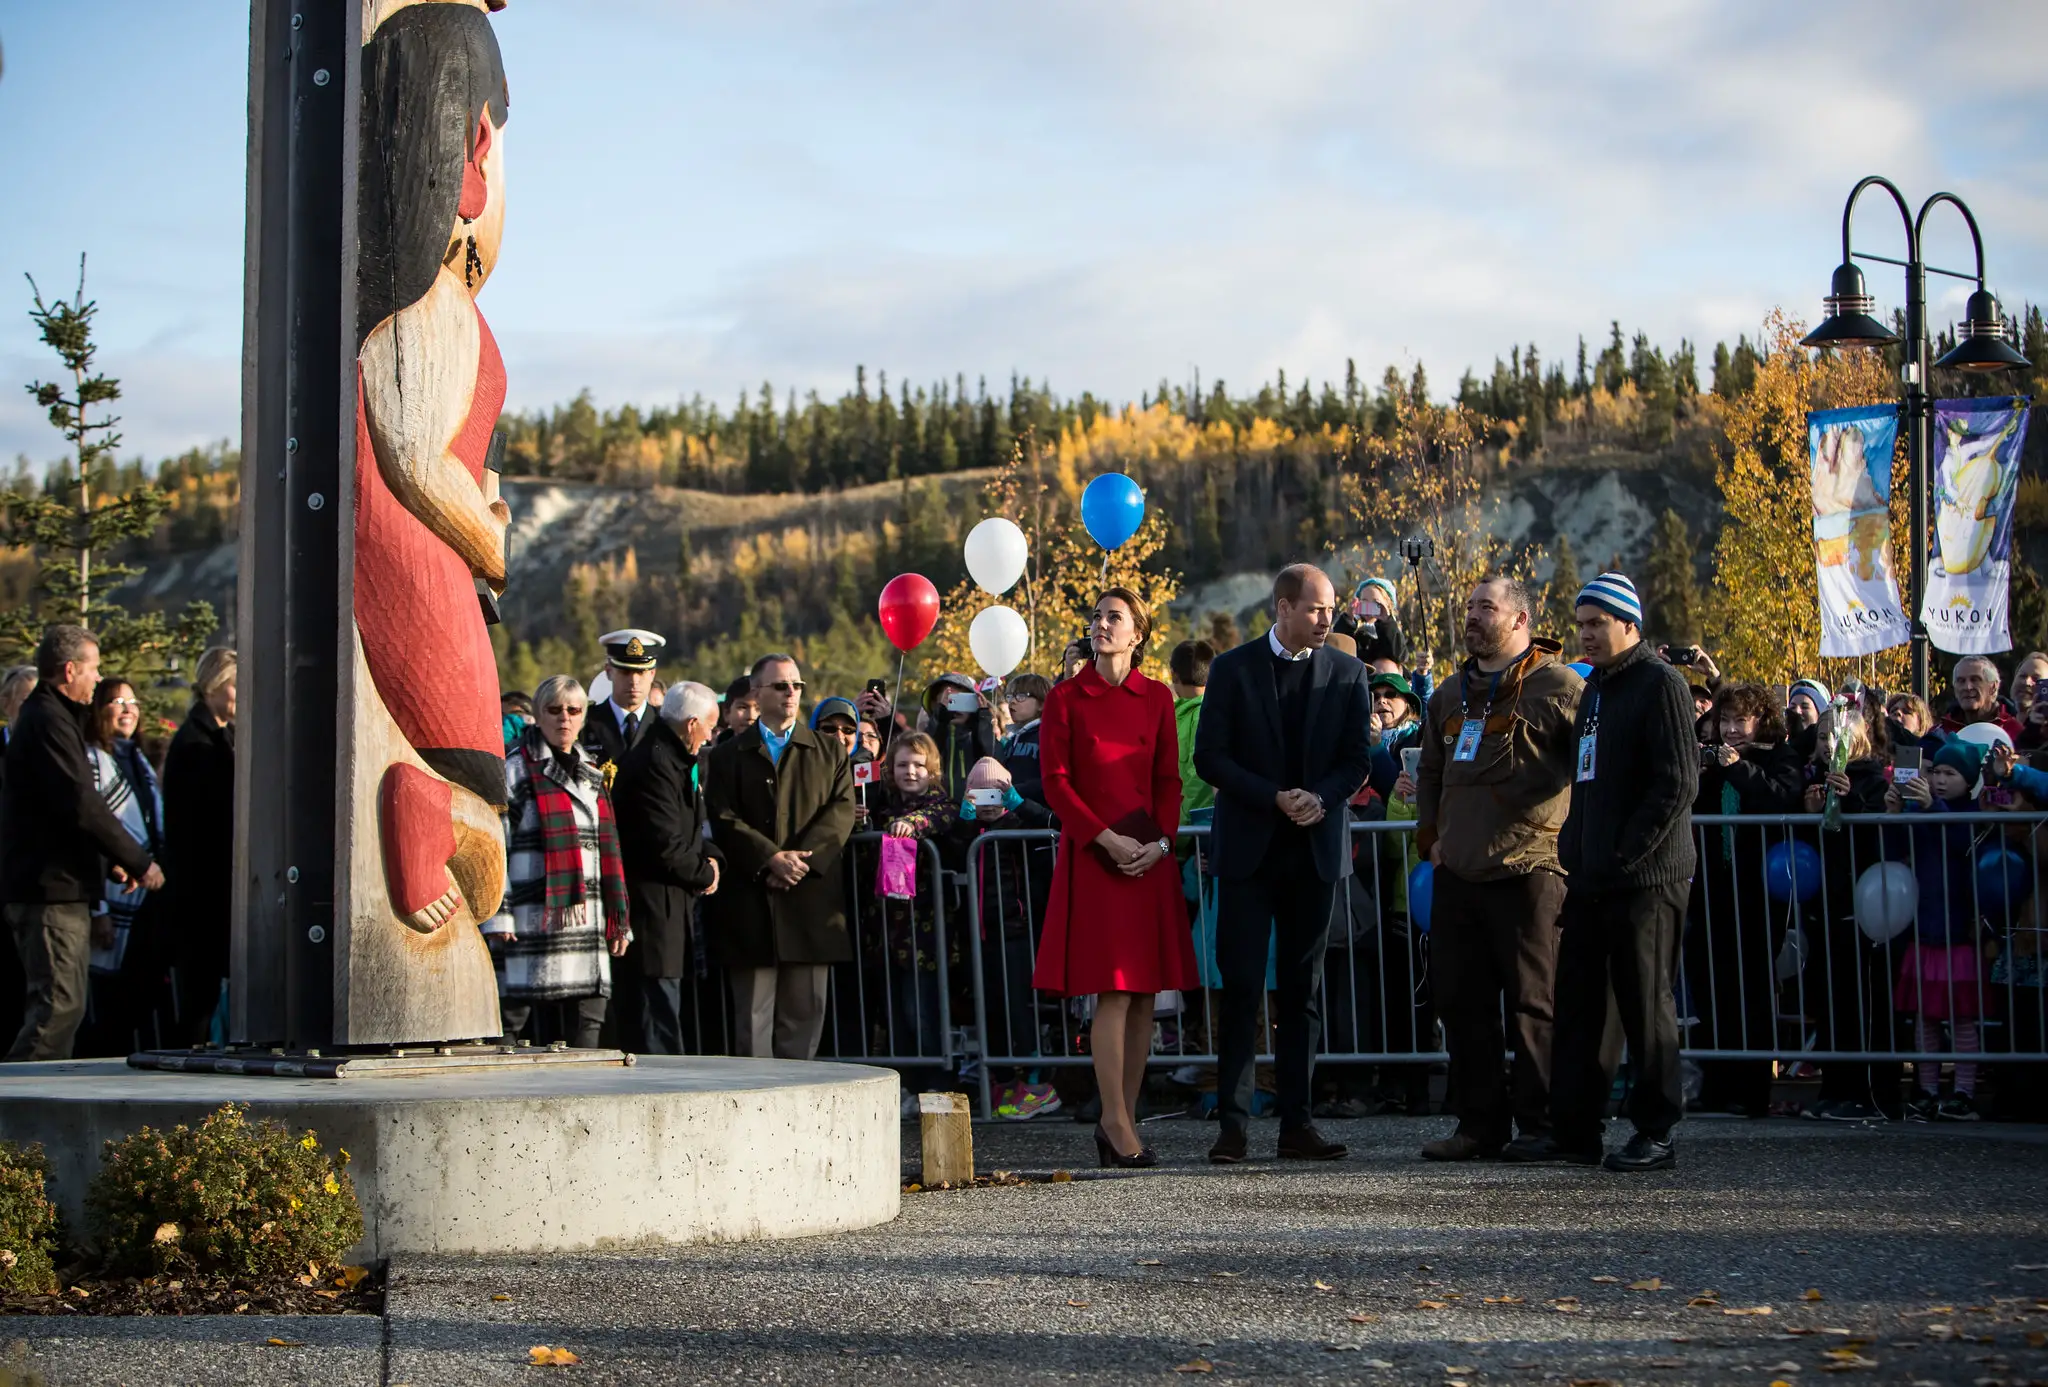 The Duke and Duchess of Cambridge attended a party at the Totem Pole in Yukon